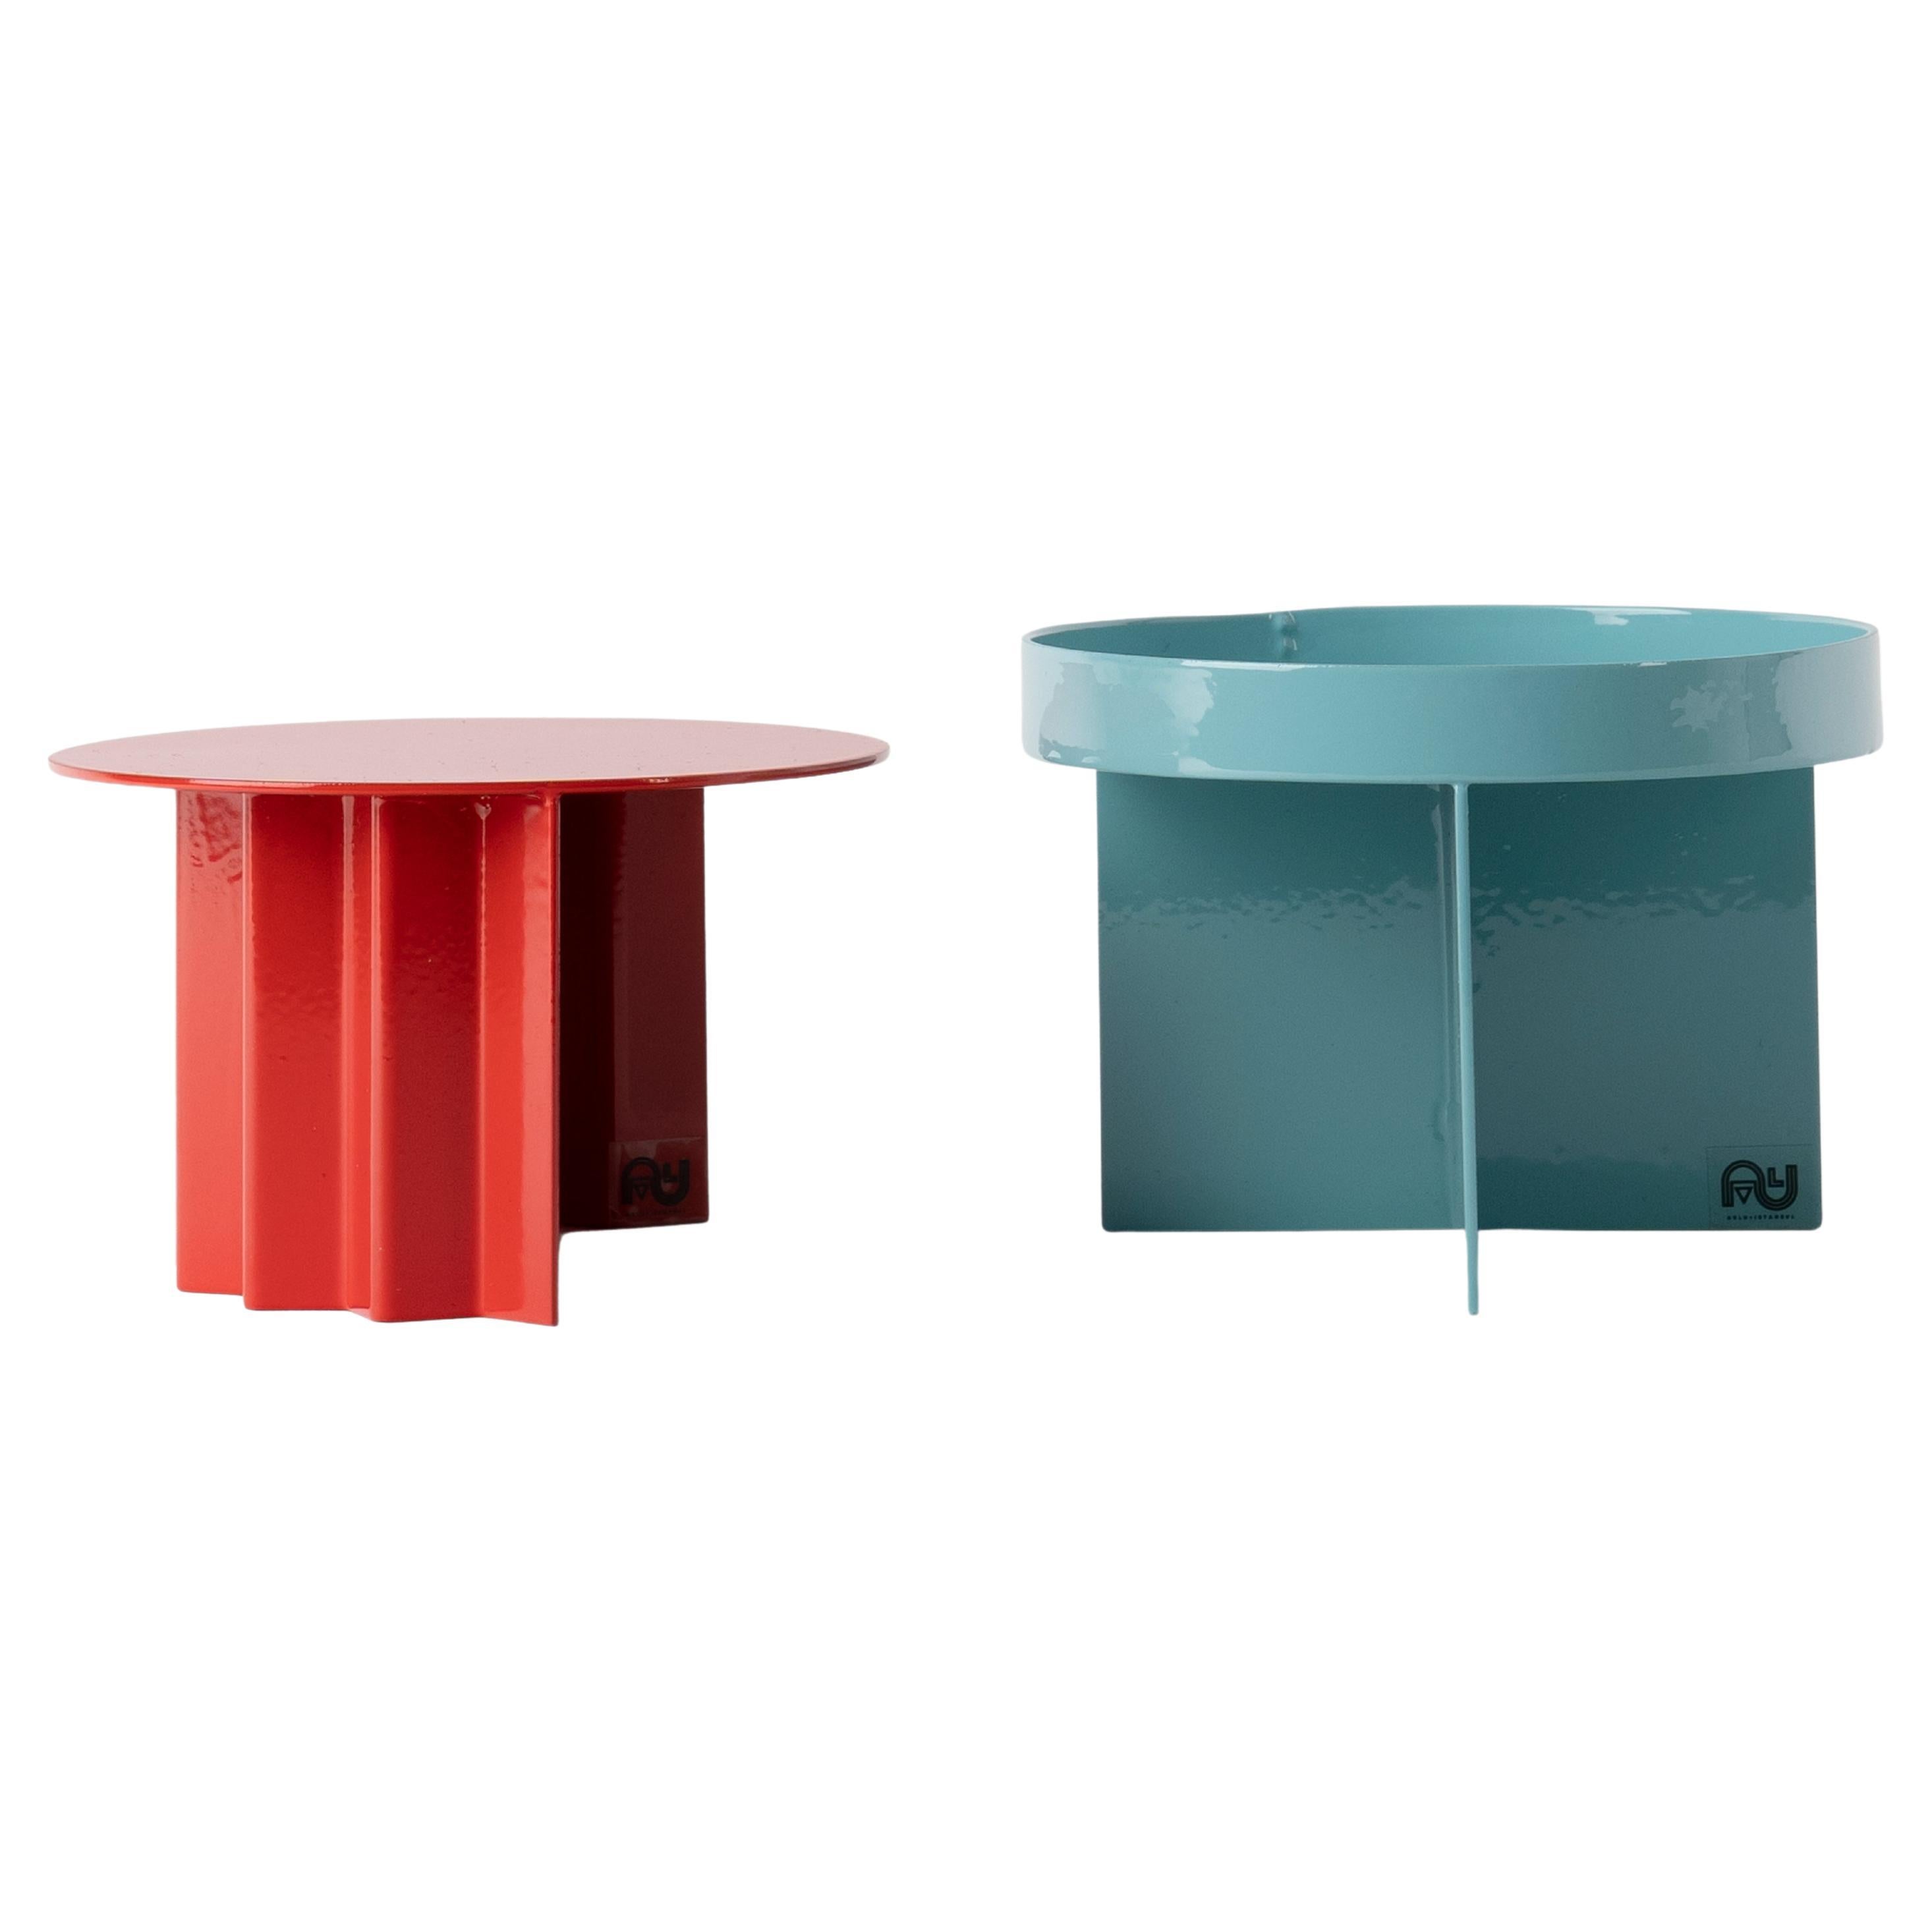 Contemporary Modern, Esnaf Navy Party Platter Duo, Turquoise and Red